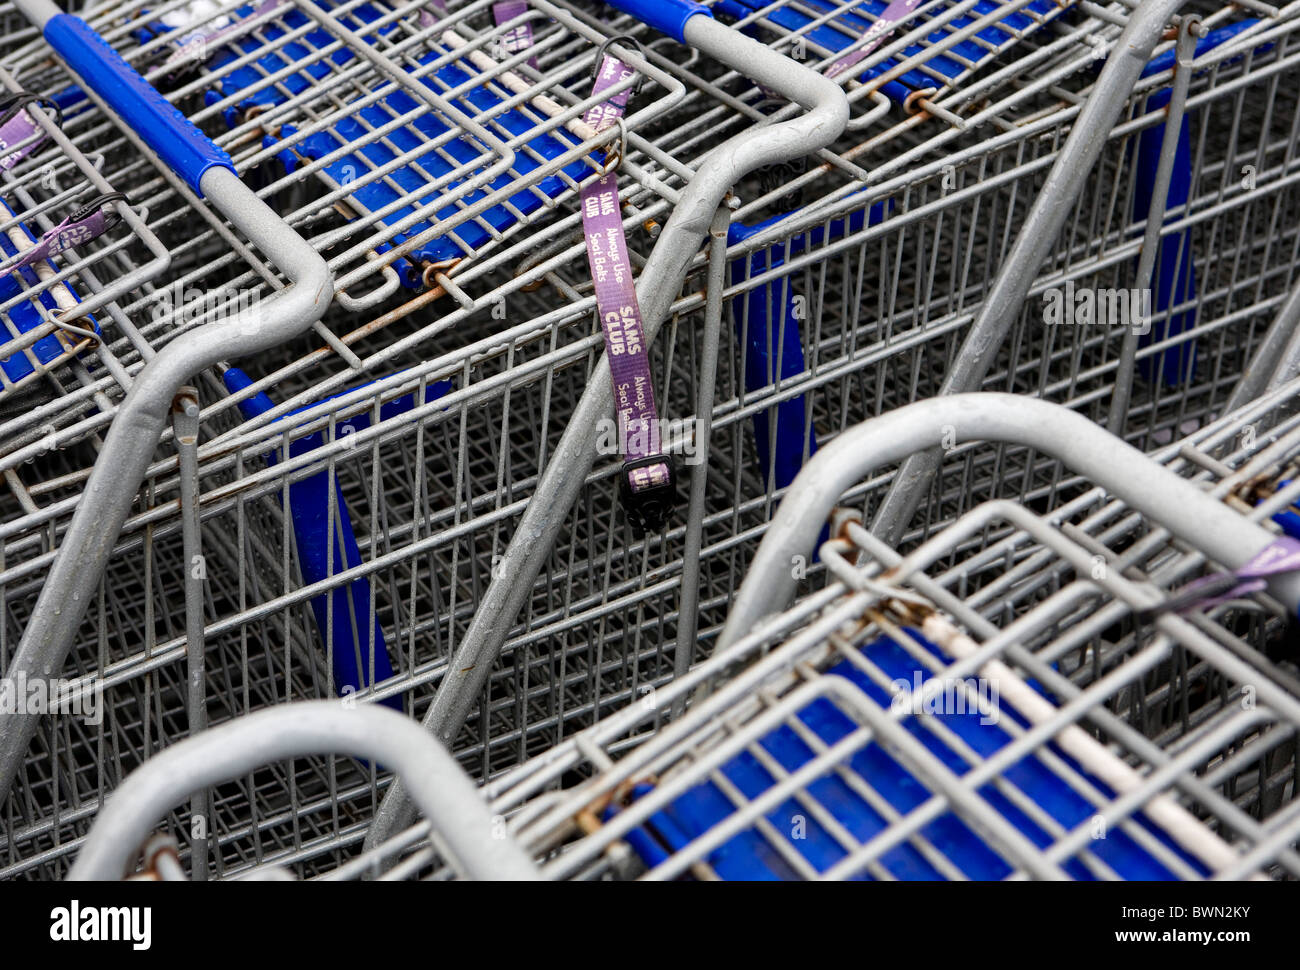 Sams club hi-res stock photography and images - Alamy